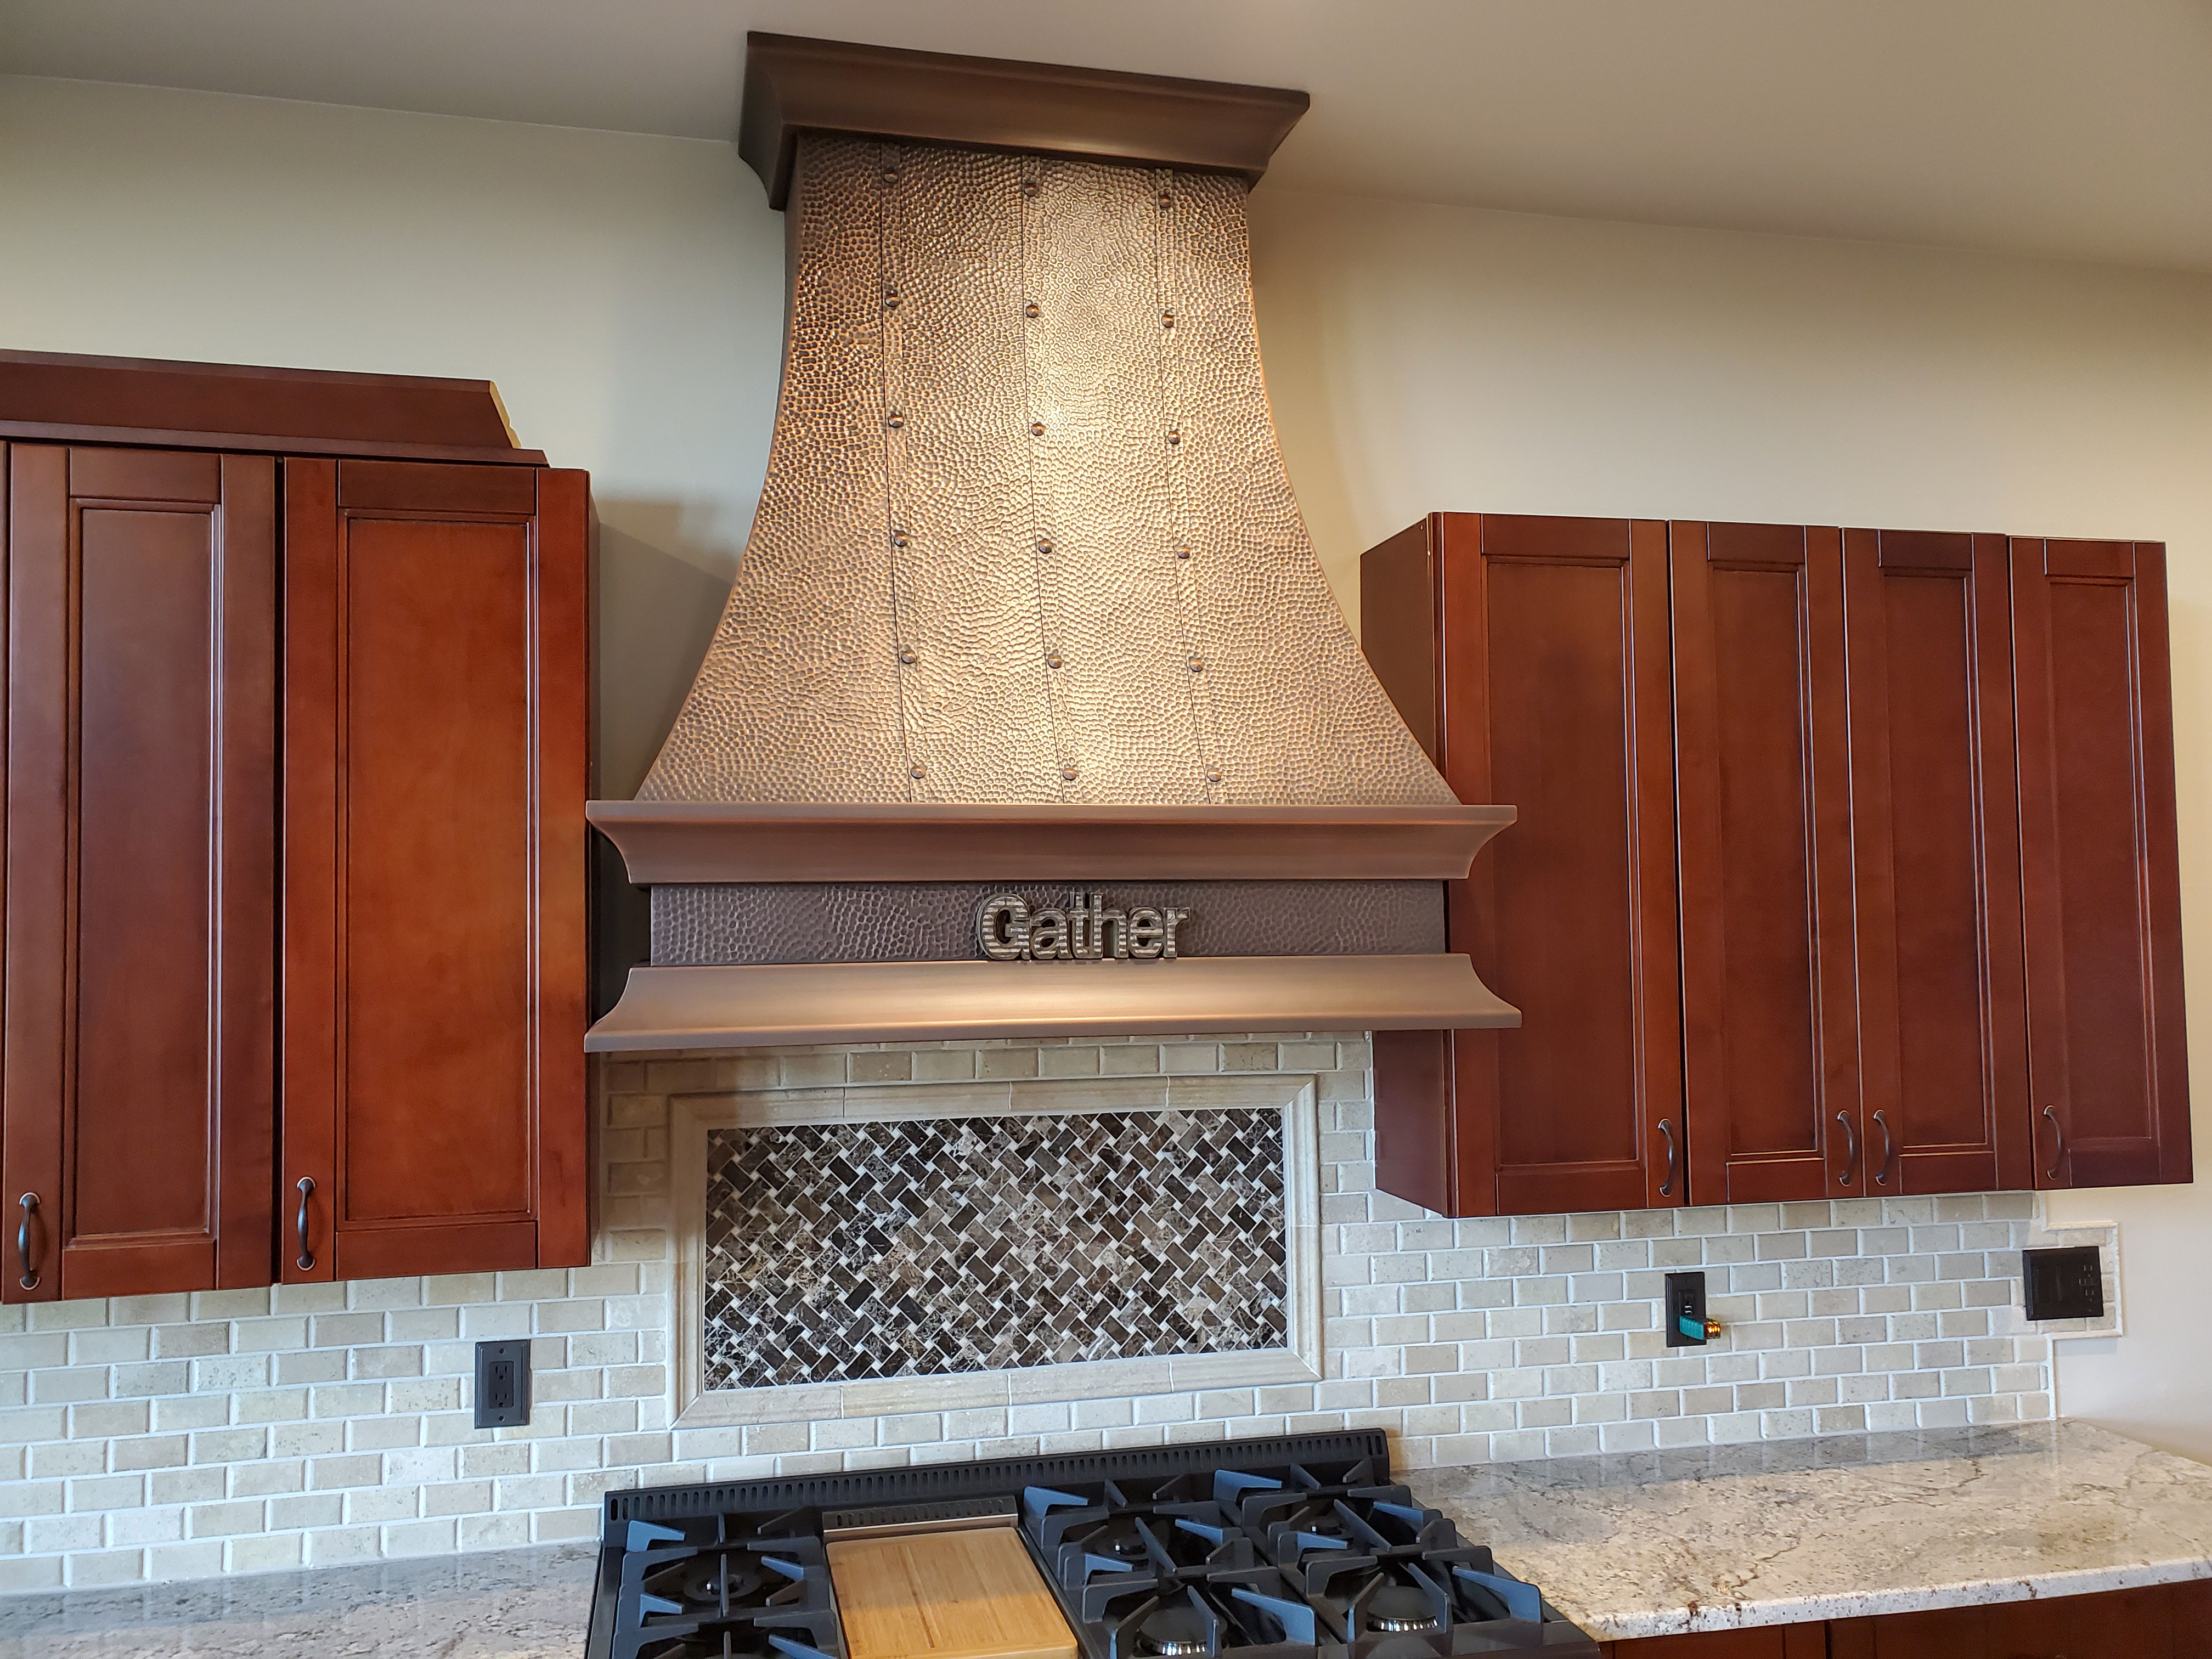 Copper range hood in a kitchen with rustic cabinets World CopperSmith